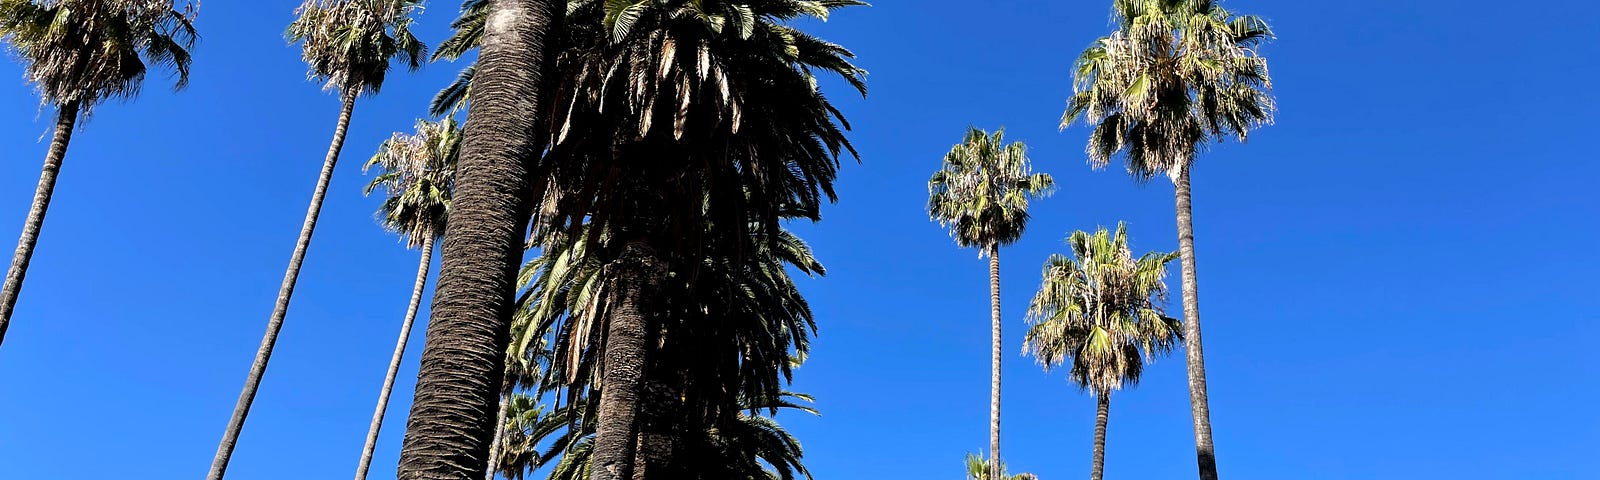 A cluster of palm trees in San Jose, CA.